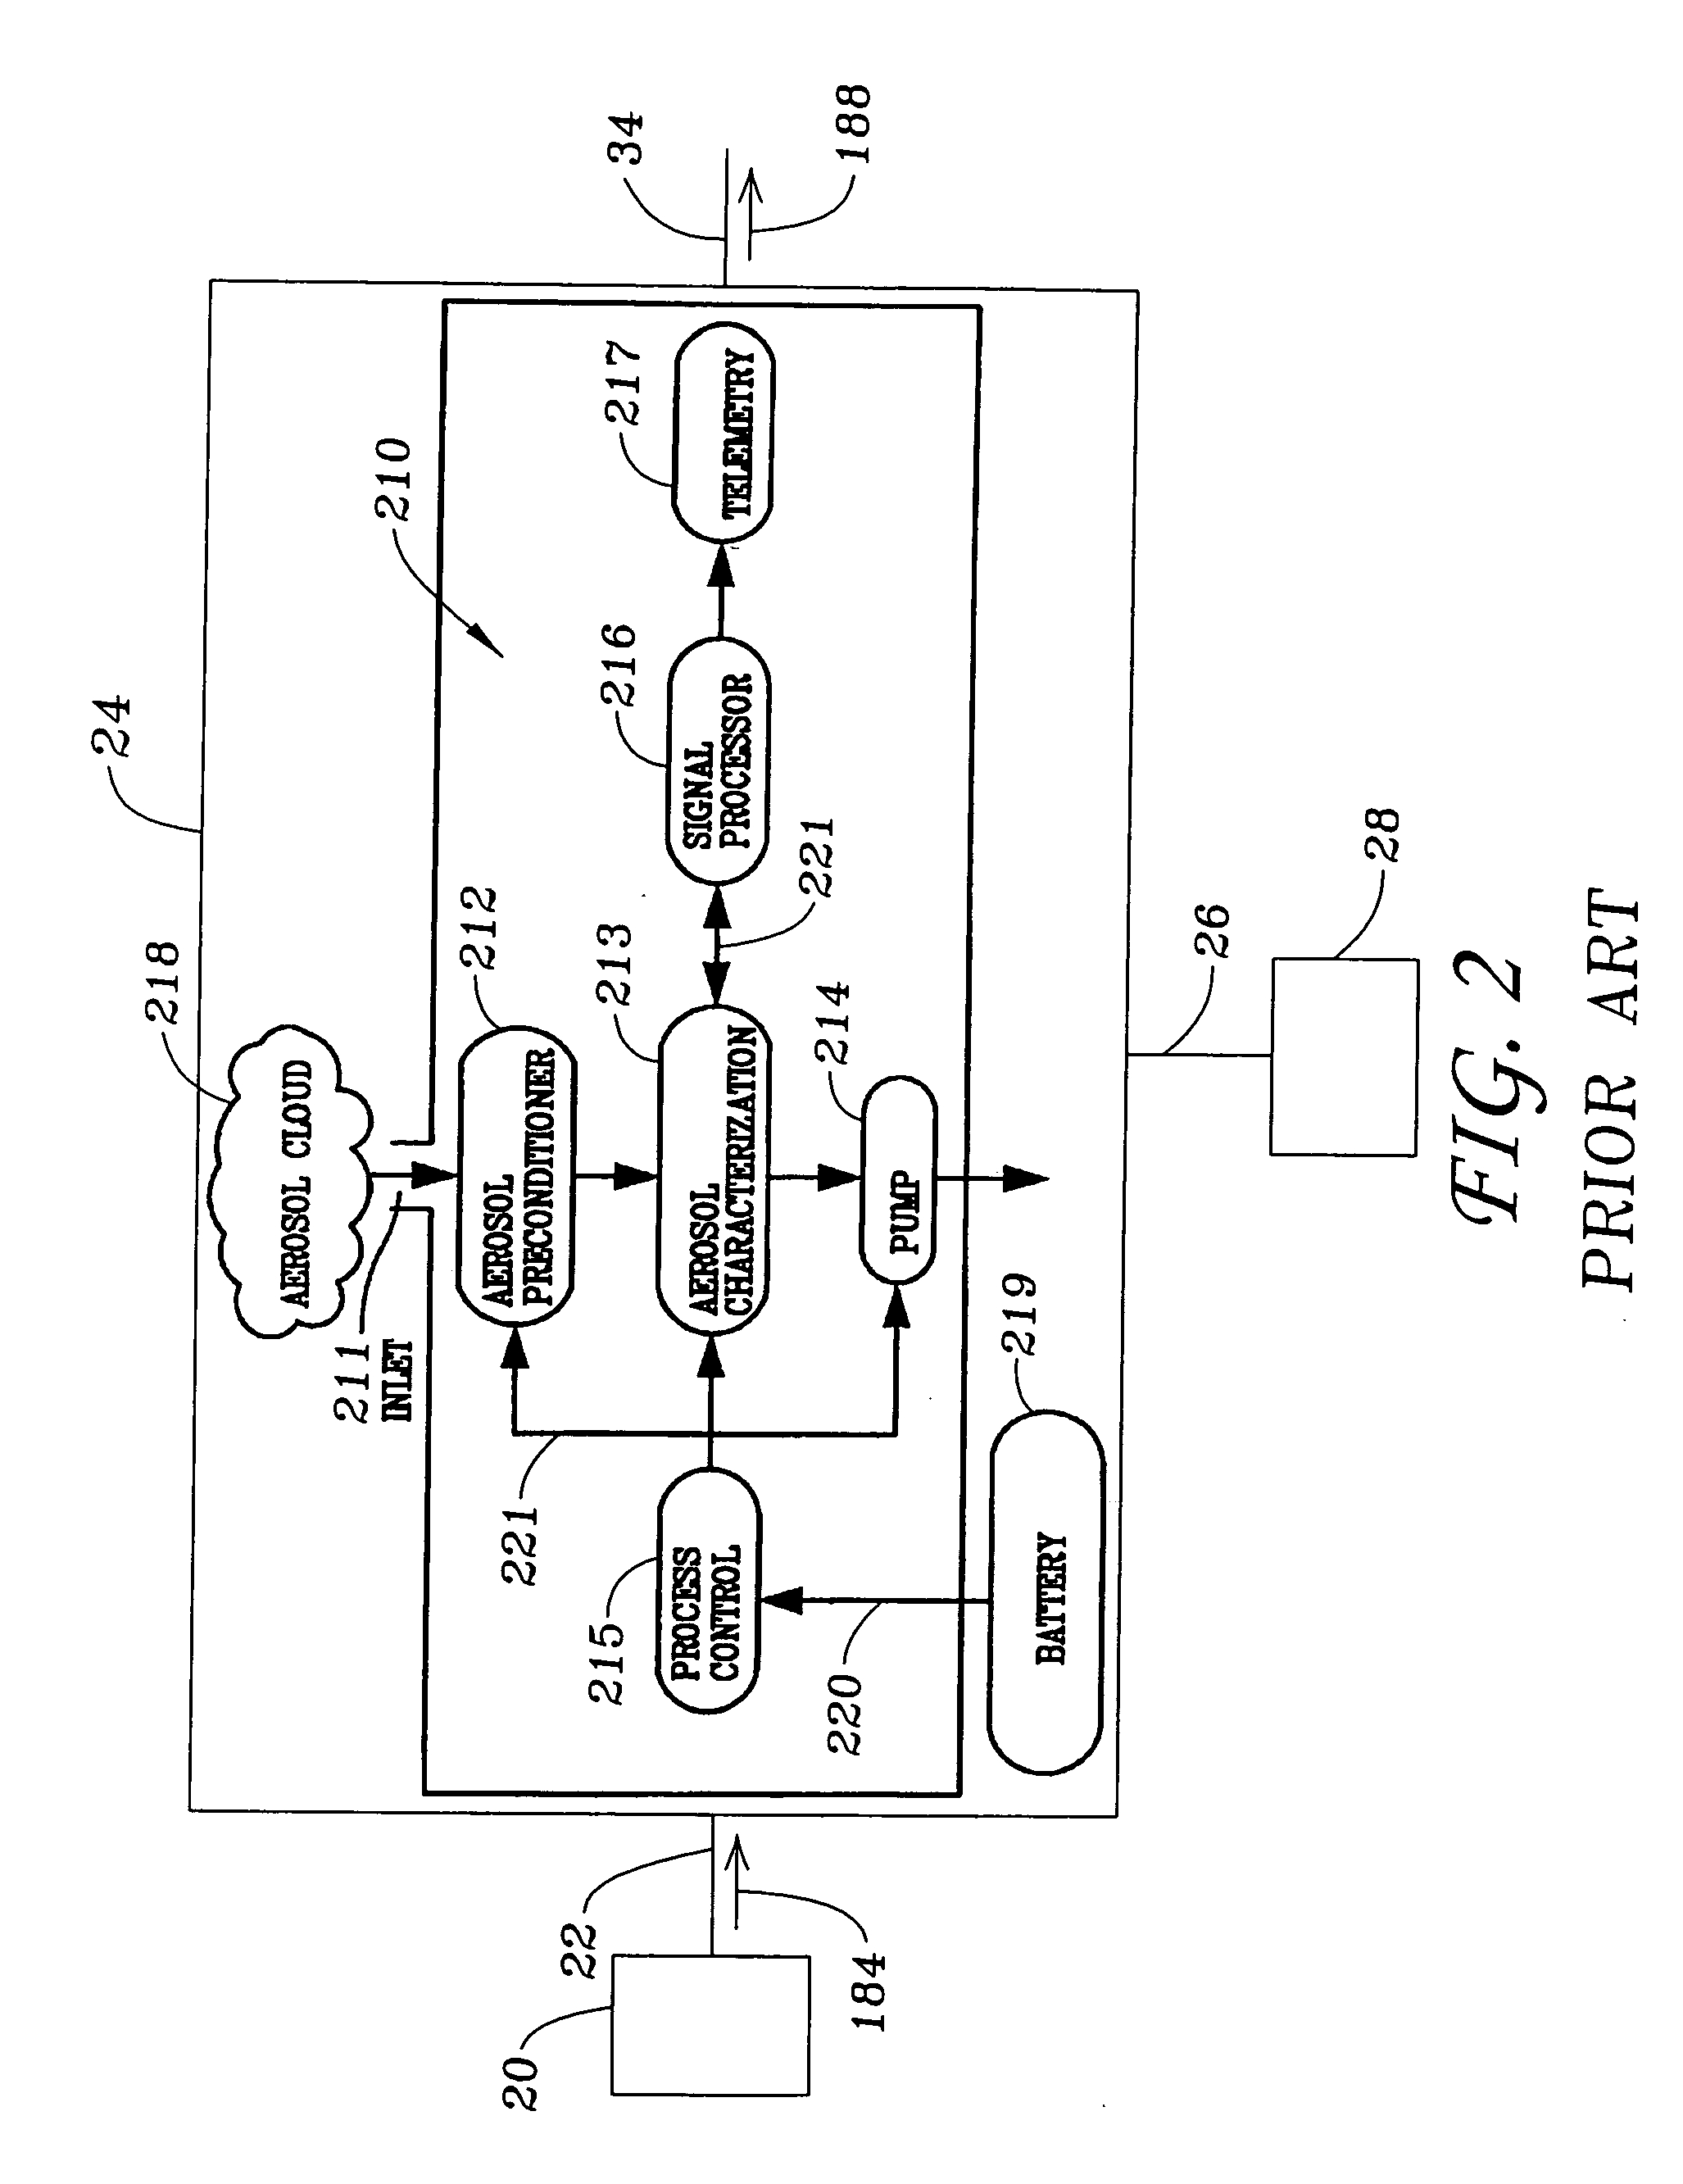 Apparatus and method of contaminant detection for food industry